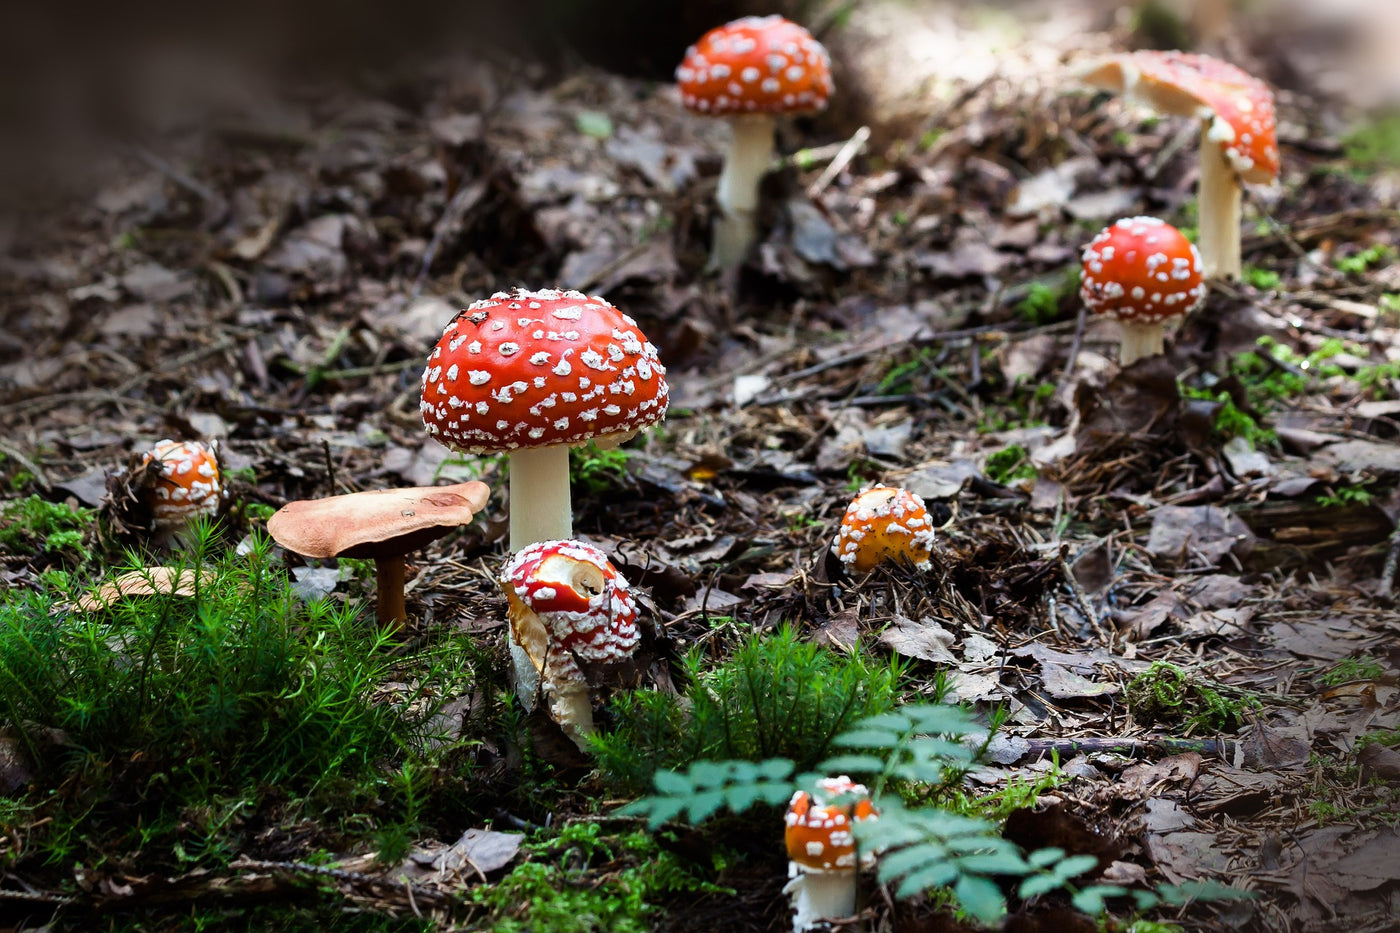 red capped mushrooms